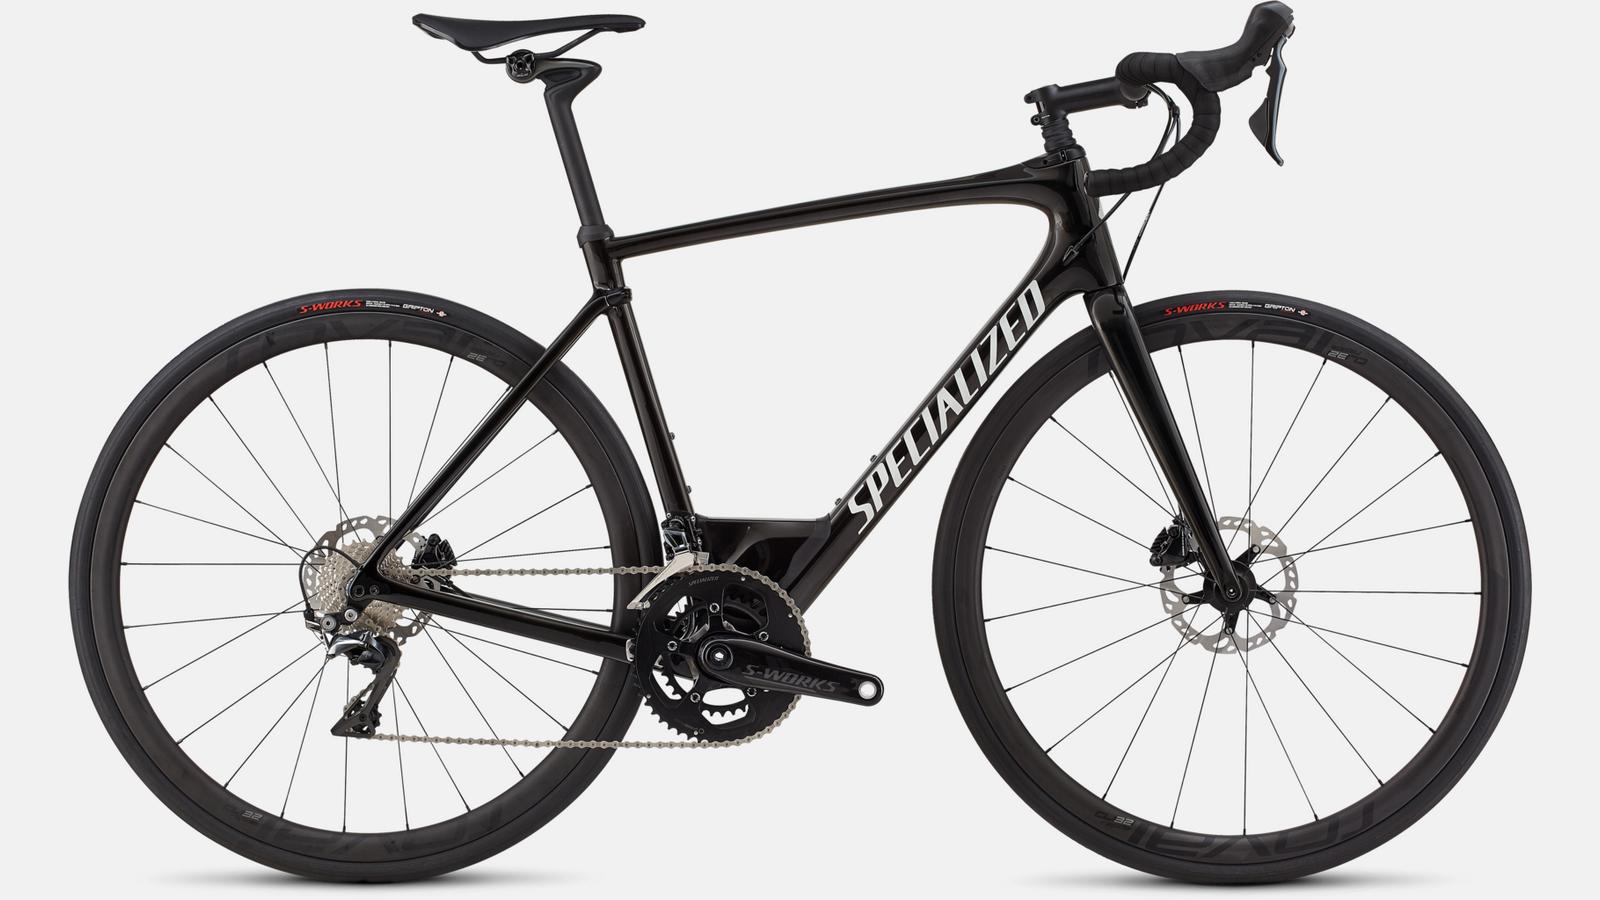 Paint for 2018 Specialized Roubaix Pro - Gloss Tarmac Black